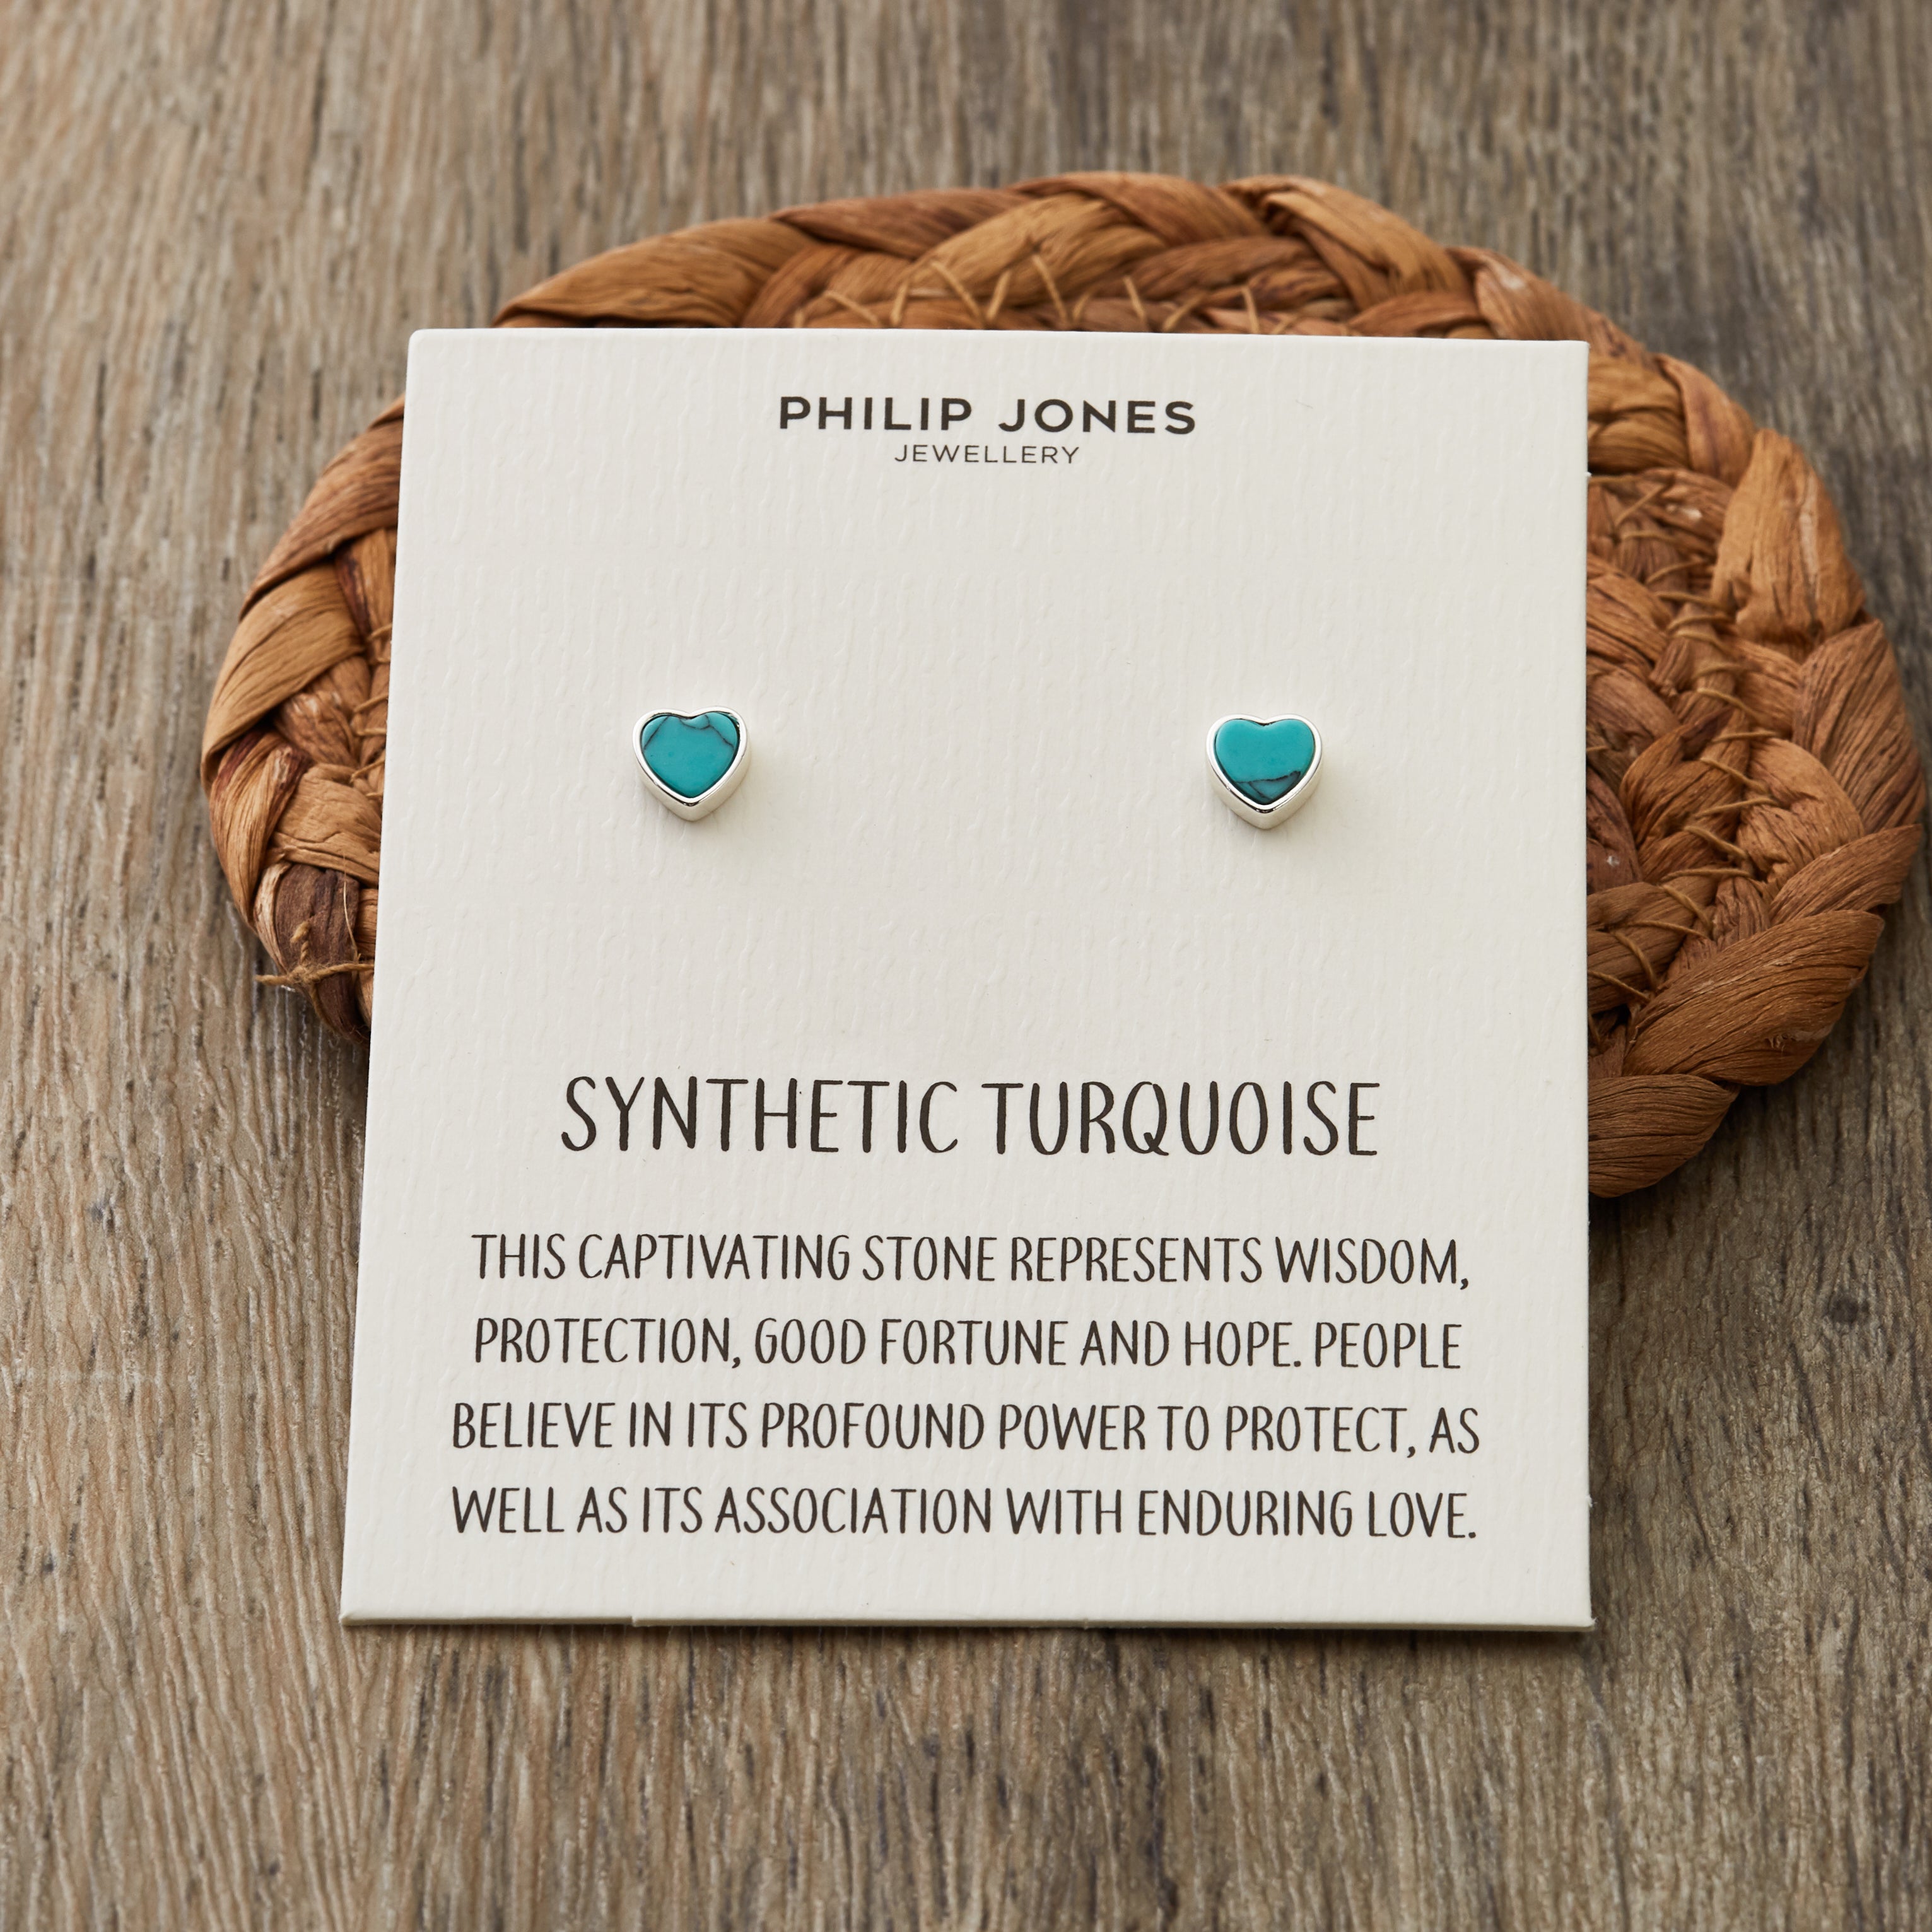 Synthetic Turquoise Heart Stud Earrings with Quote Card